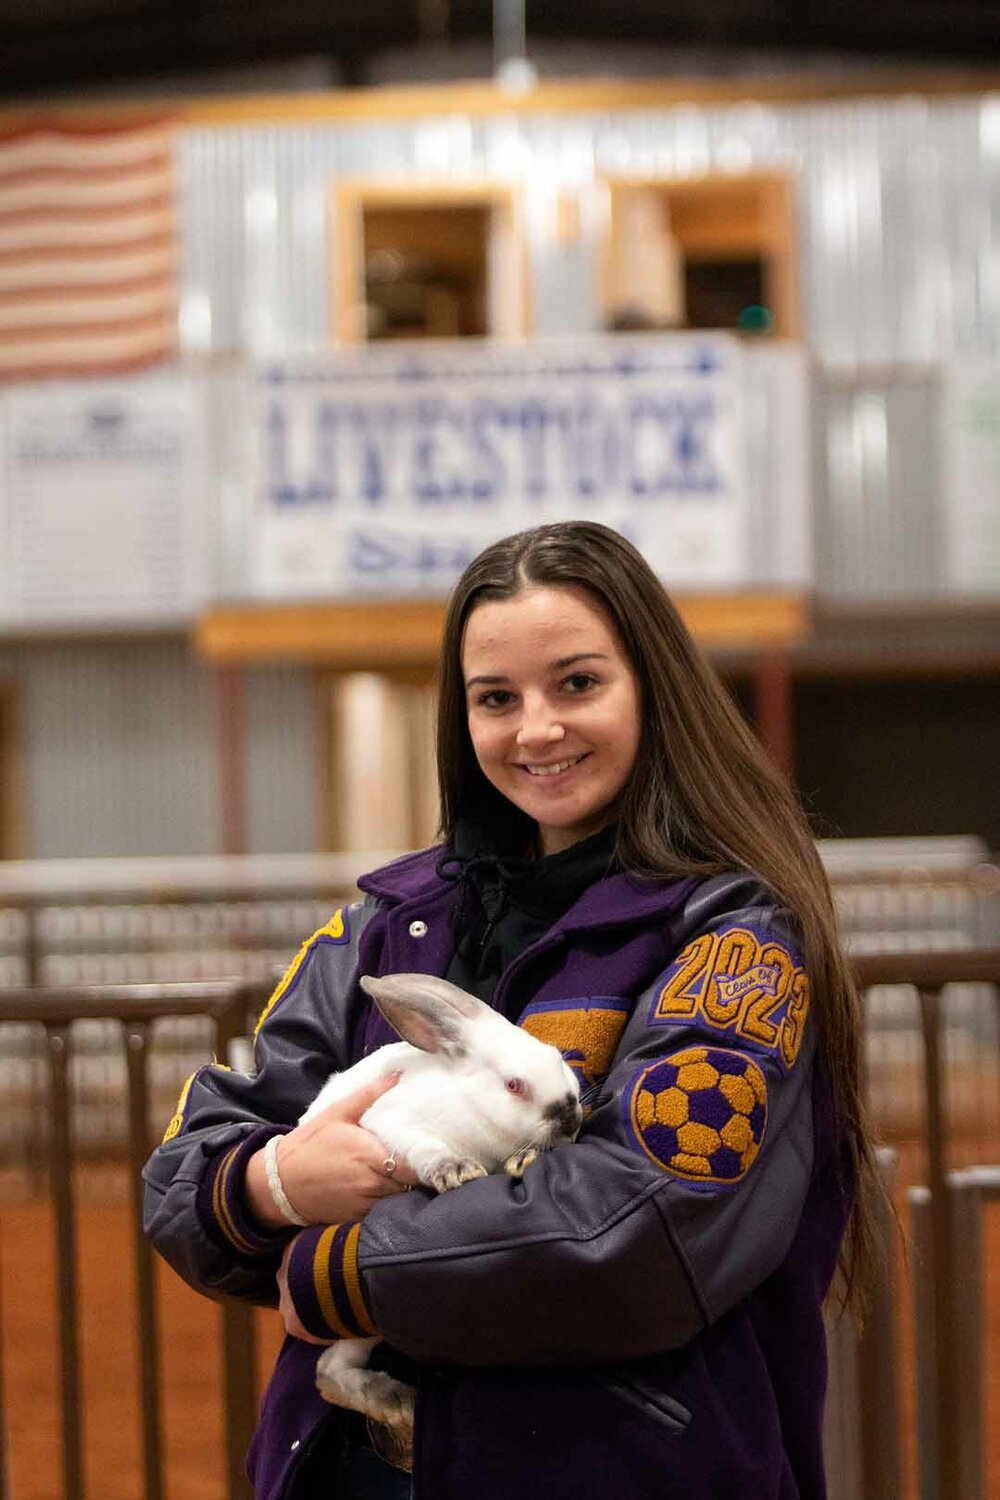 FFA PROUD: Kenzie Prock, a junior at Granbury High School, has been involved with FFA for three years and is in her second year of showing rabbits.